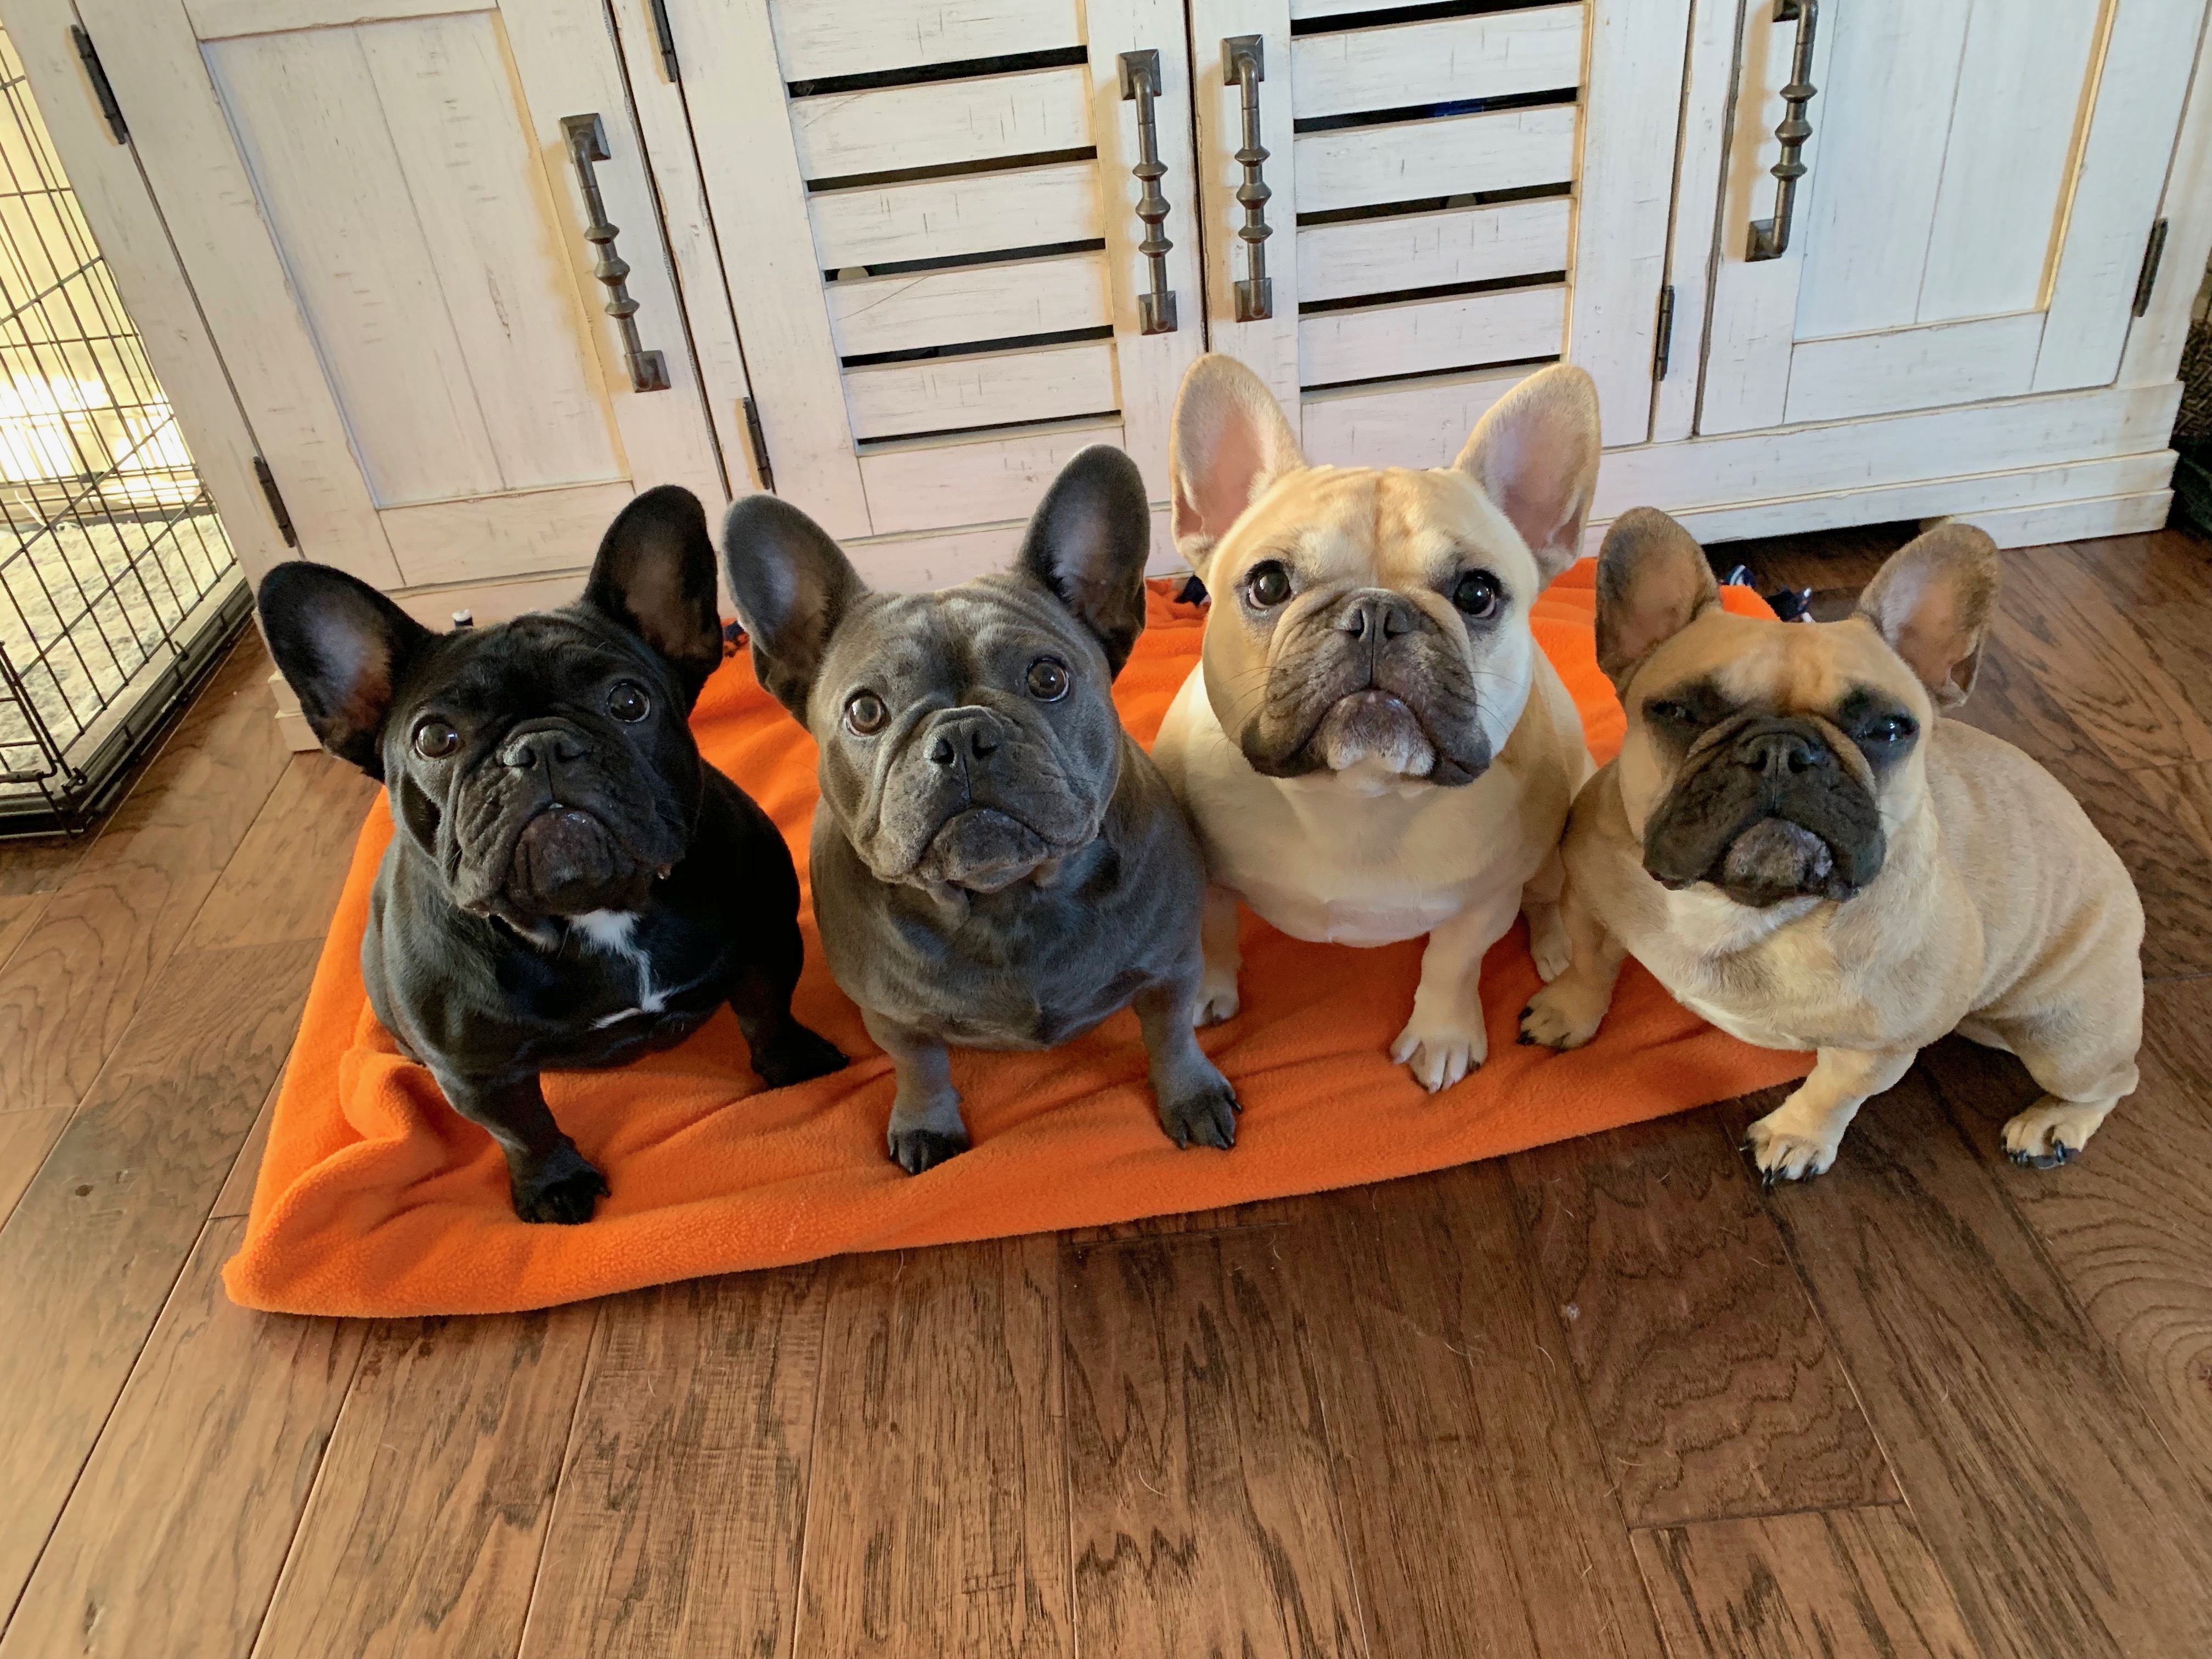 Helping 4 French Bulldogs Develop Self Control with Some